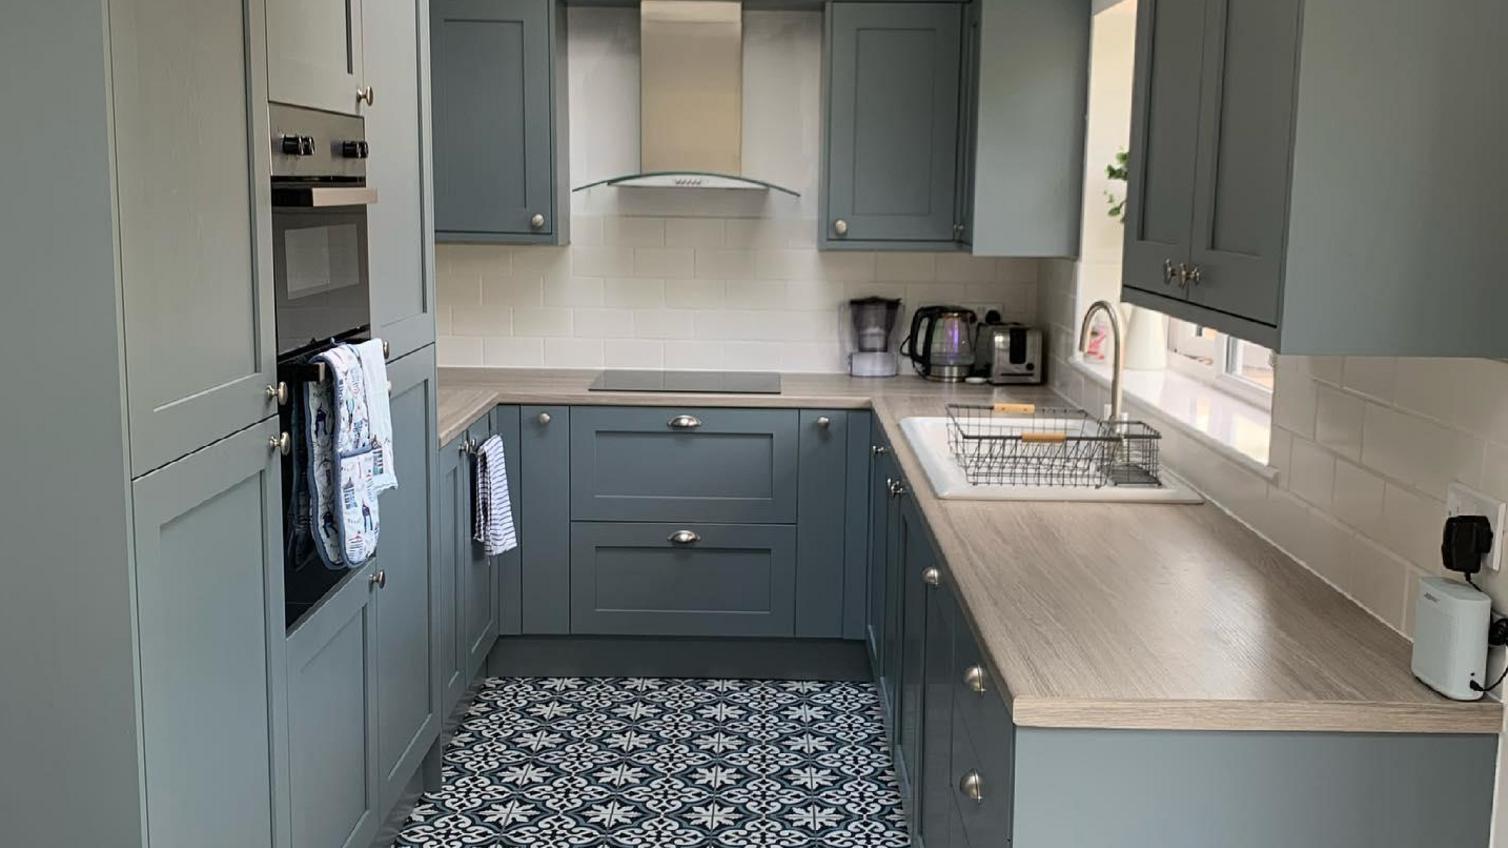 A blue shaker kitchen idea with dusk-blue Chilcomb shaker cupboard doors and brown wood-effect worktops in a u-shaped layout.